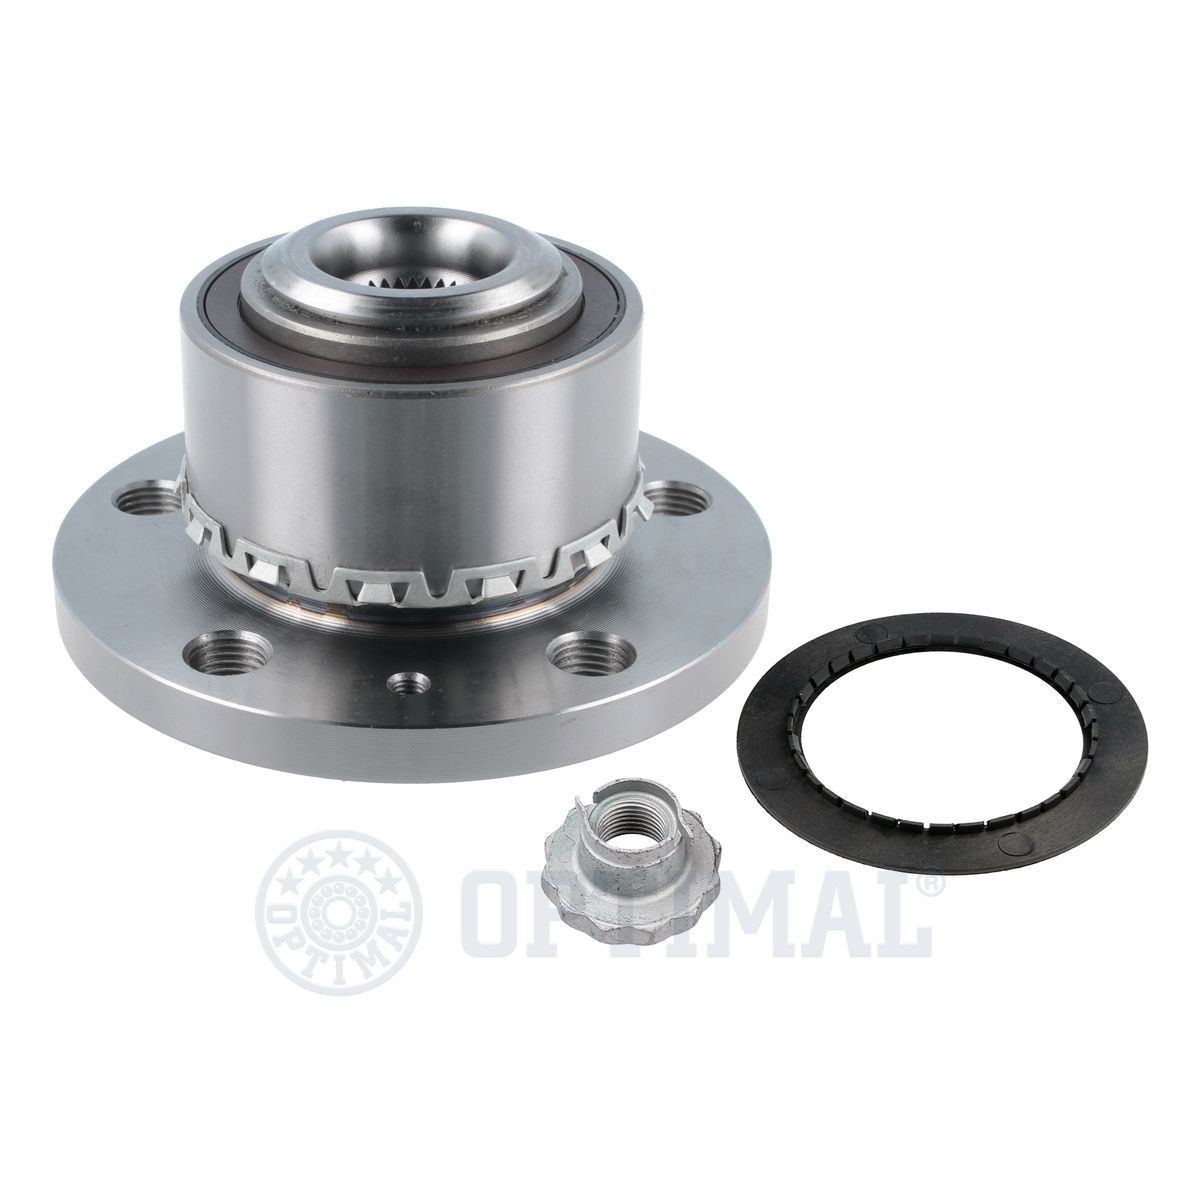 101028 OPTIMAL Wheel bearings SKODA with integrated magnetic sensor ring, Requires special tools for mounting, 126,6, 78 mm